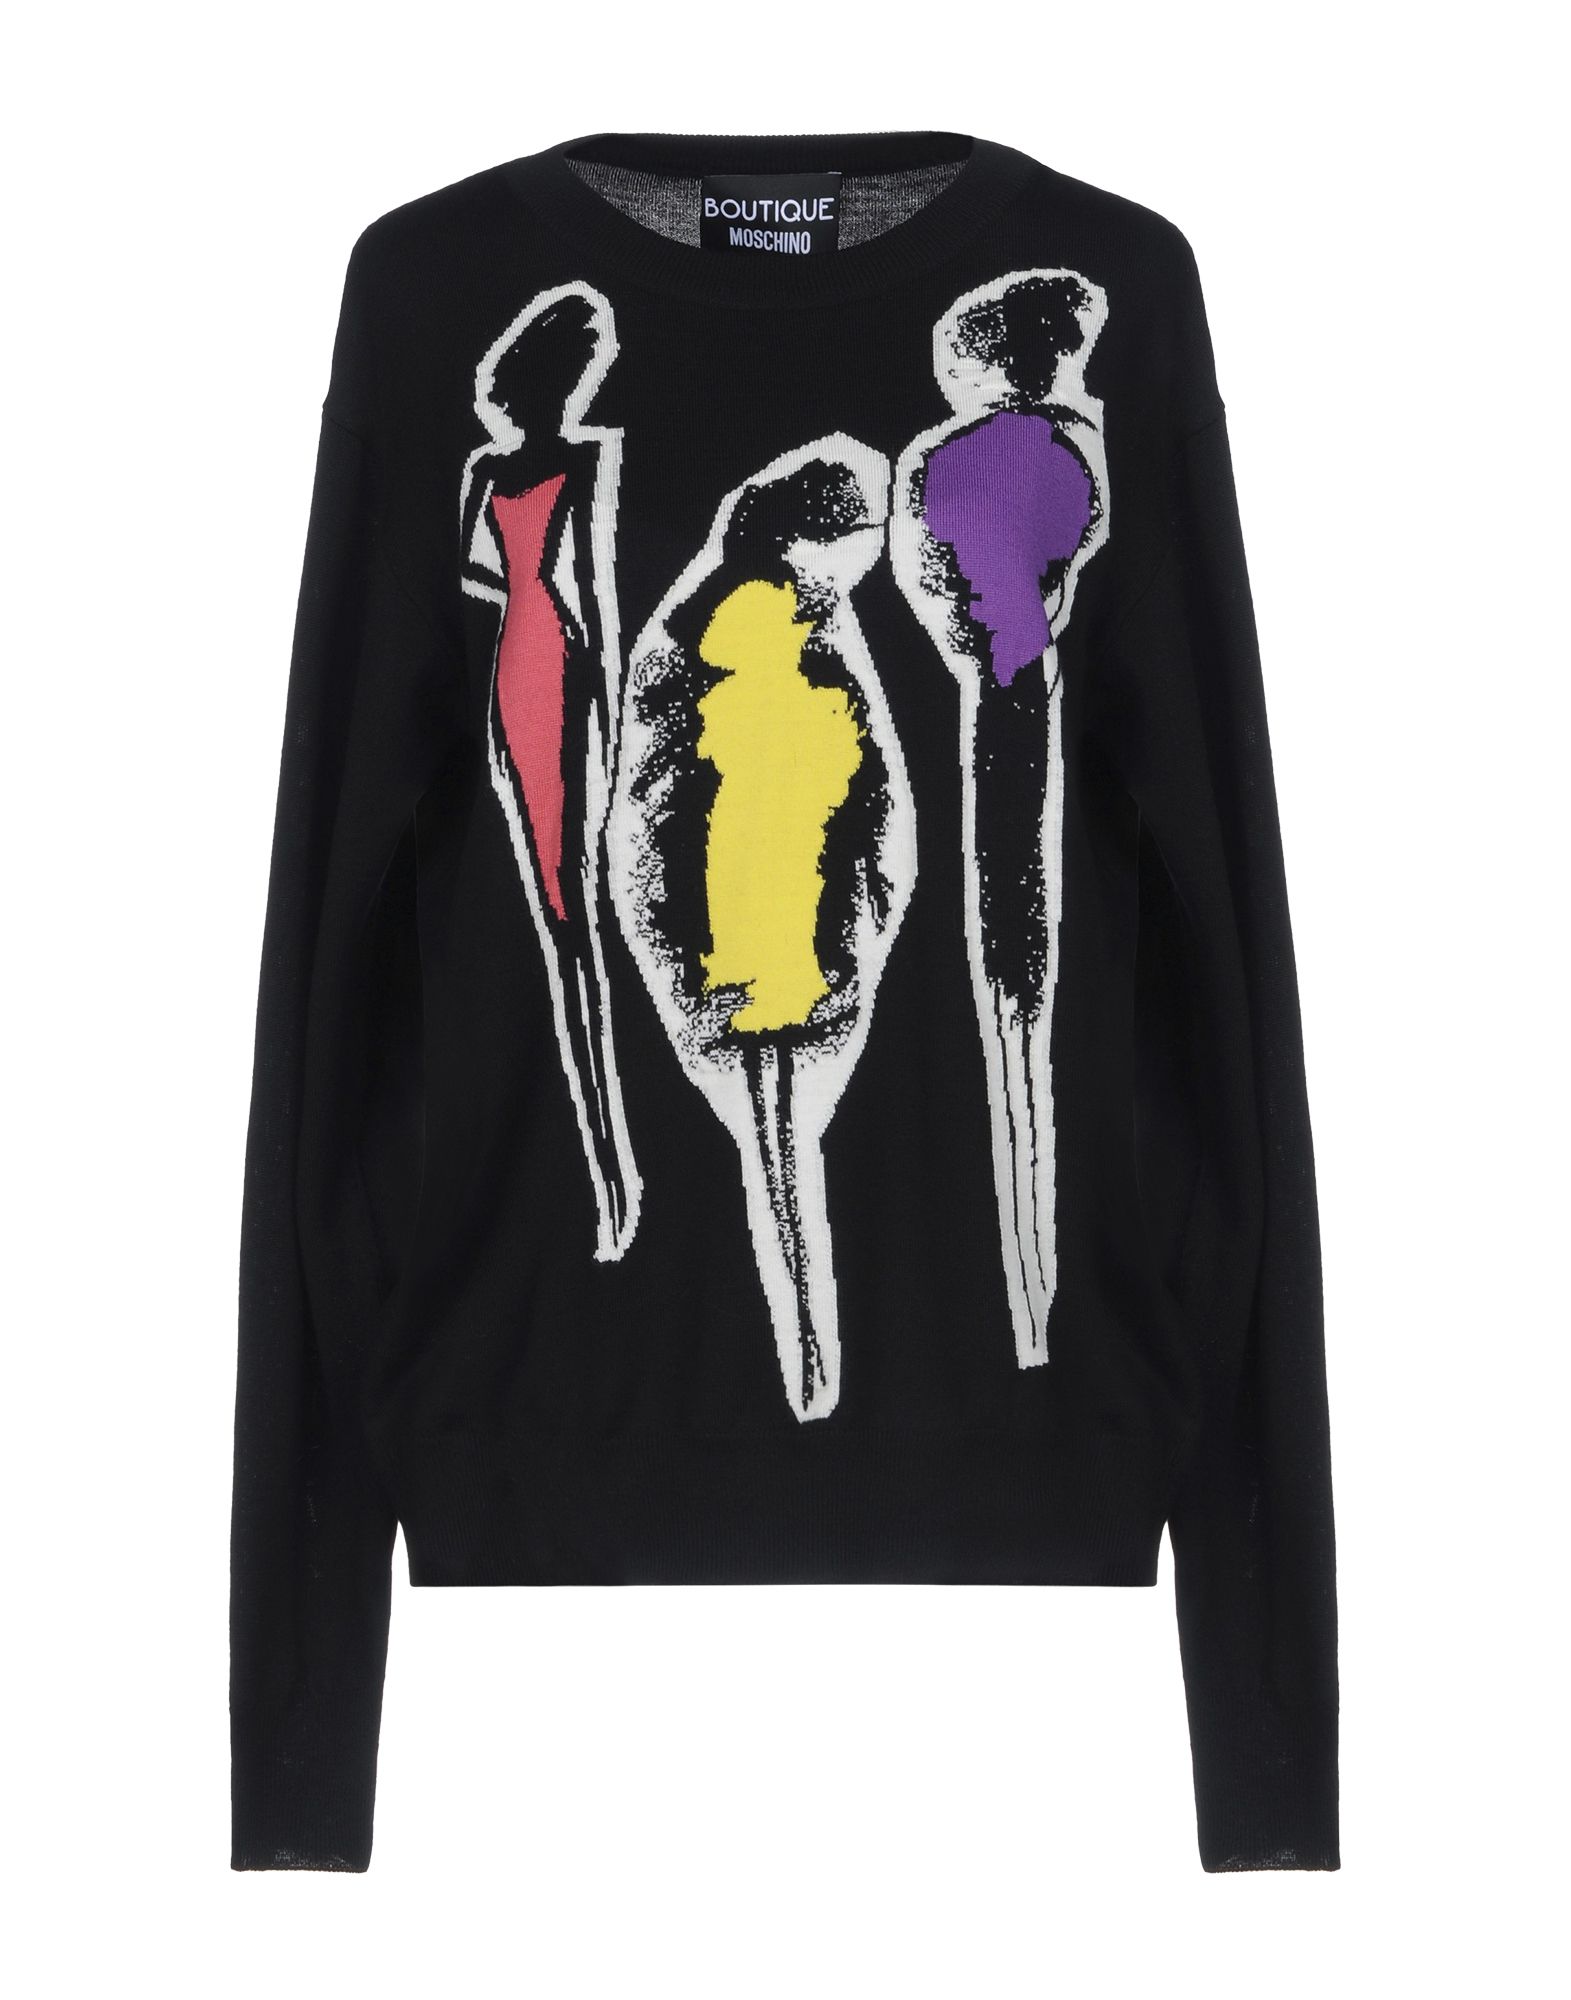 BOUTIQUE MOSCHINO Sweater,39846577HB 3